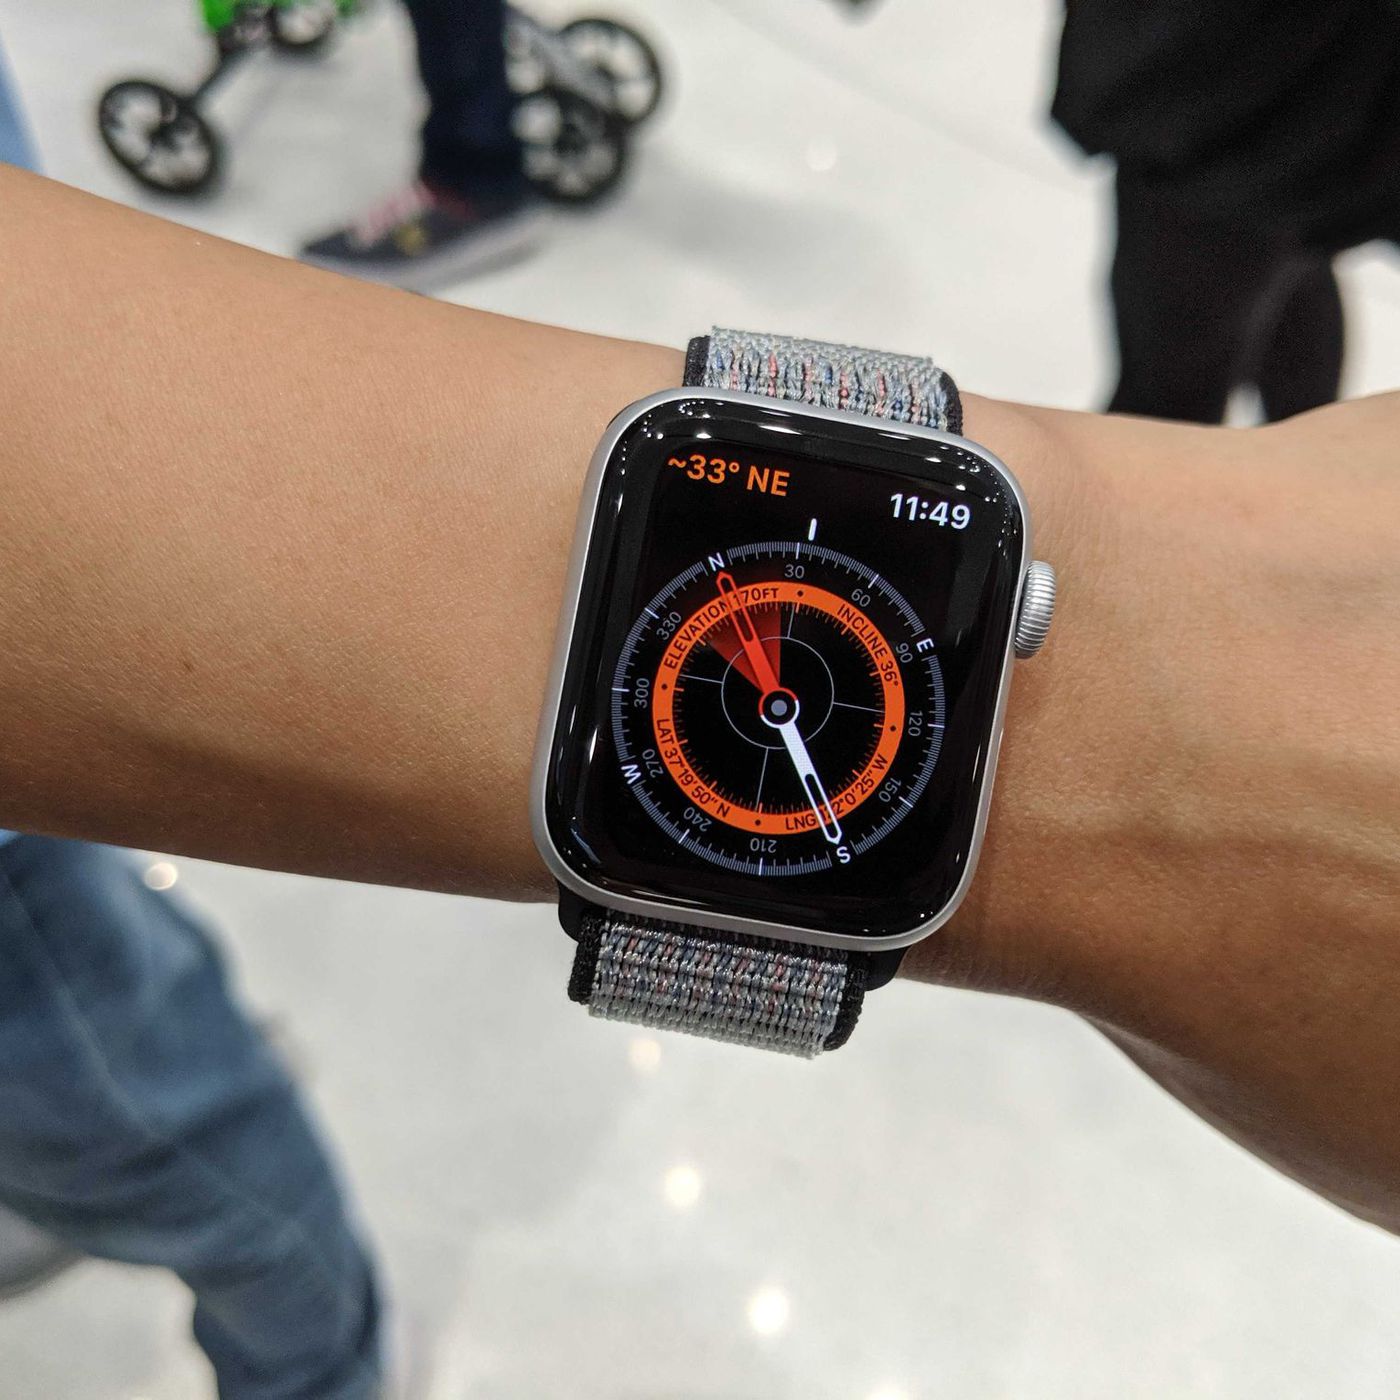 Apple Watch Series 5: hands-on with the new generation smartwatch